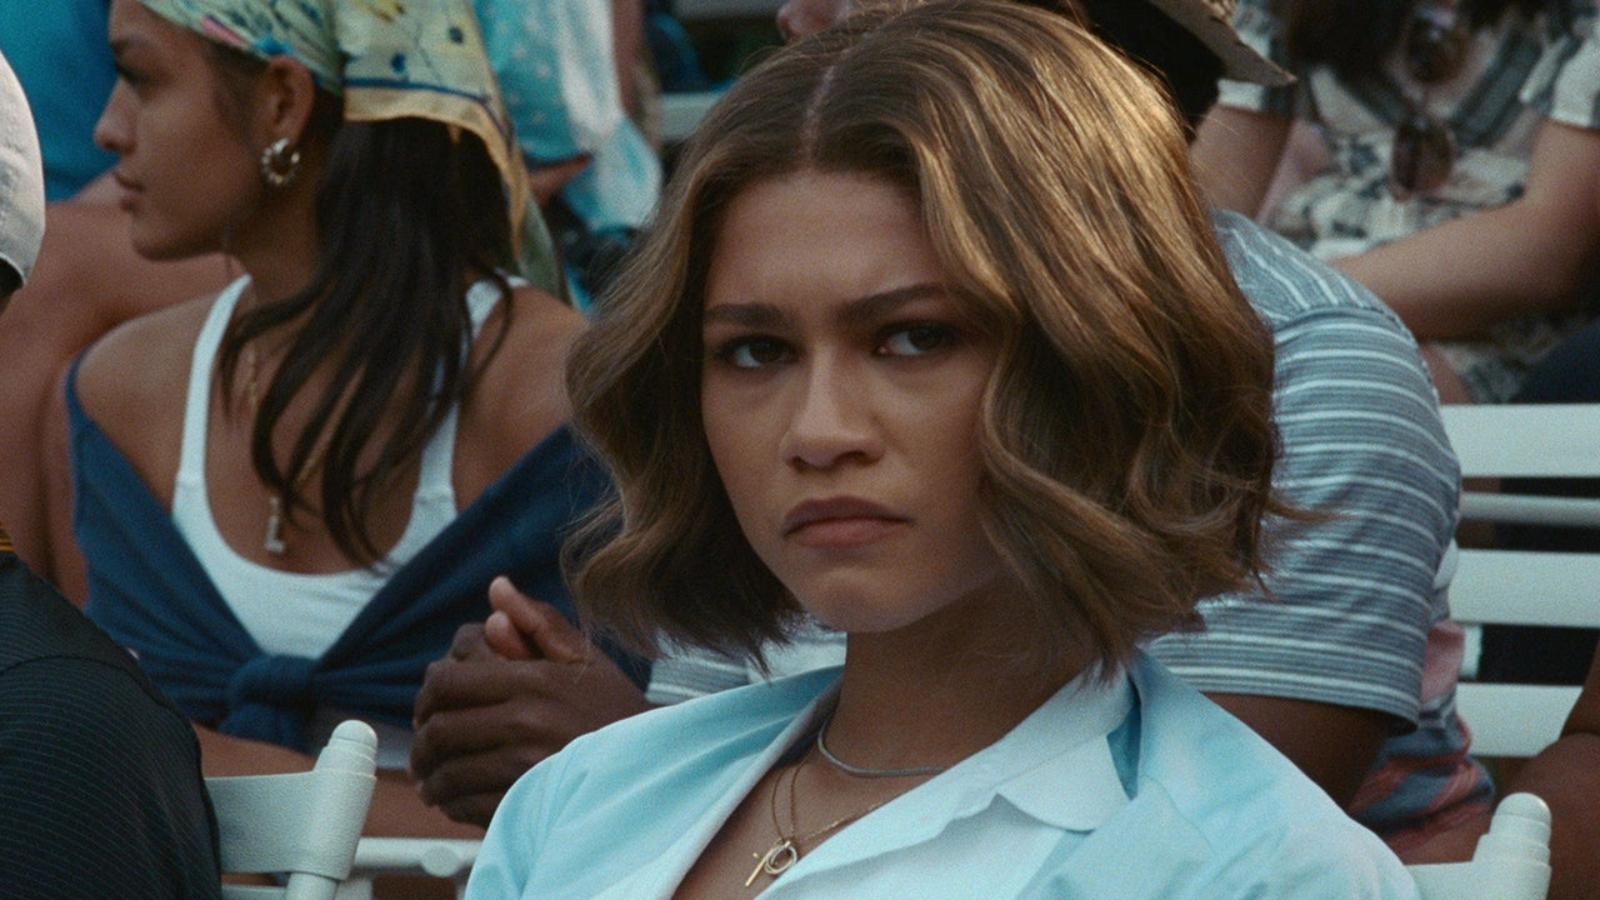 Zendaya as Tashi in Challengers, sitting in the stands and looking concerned